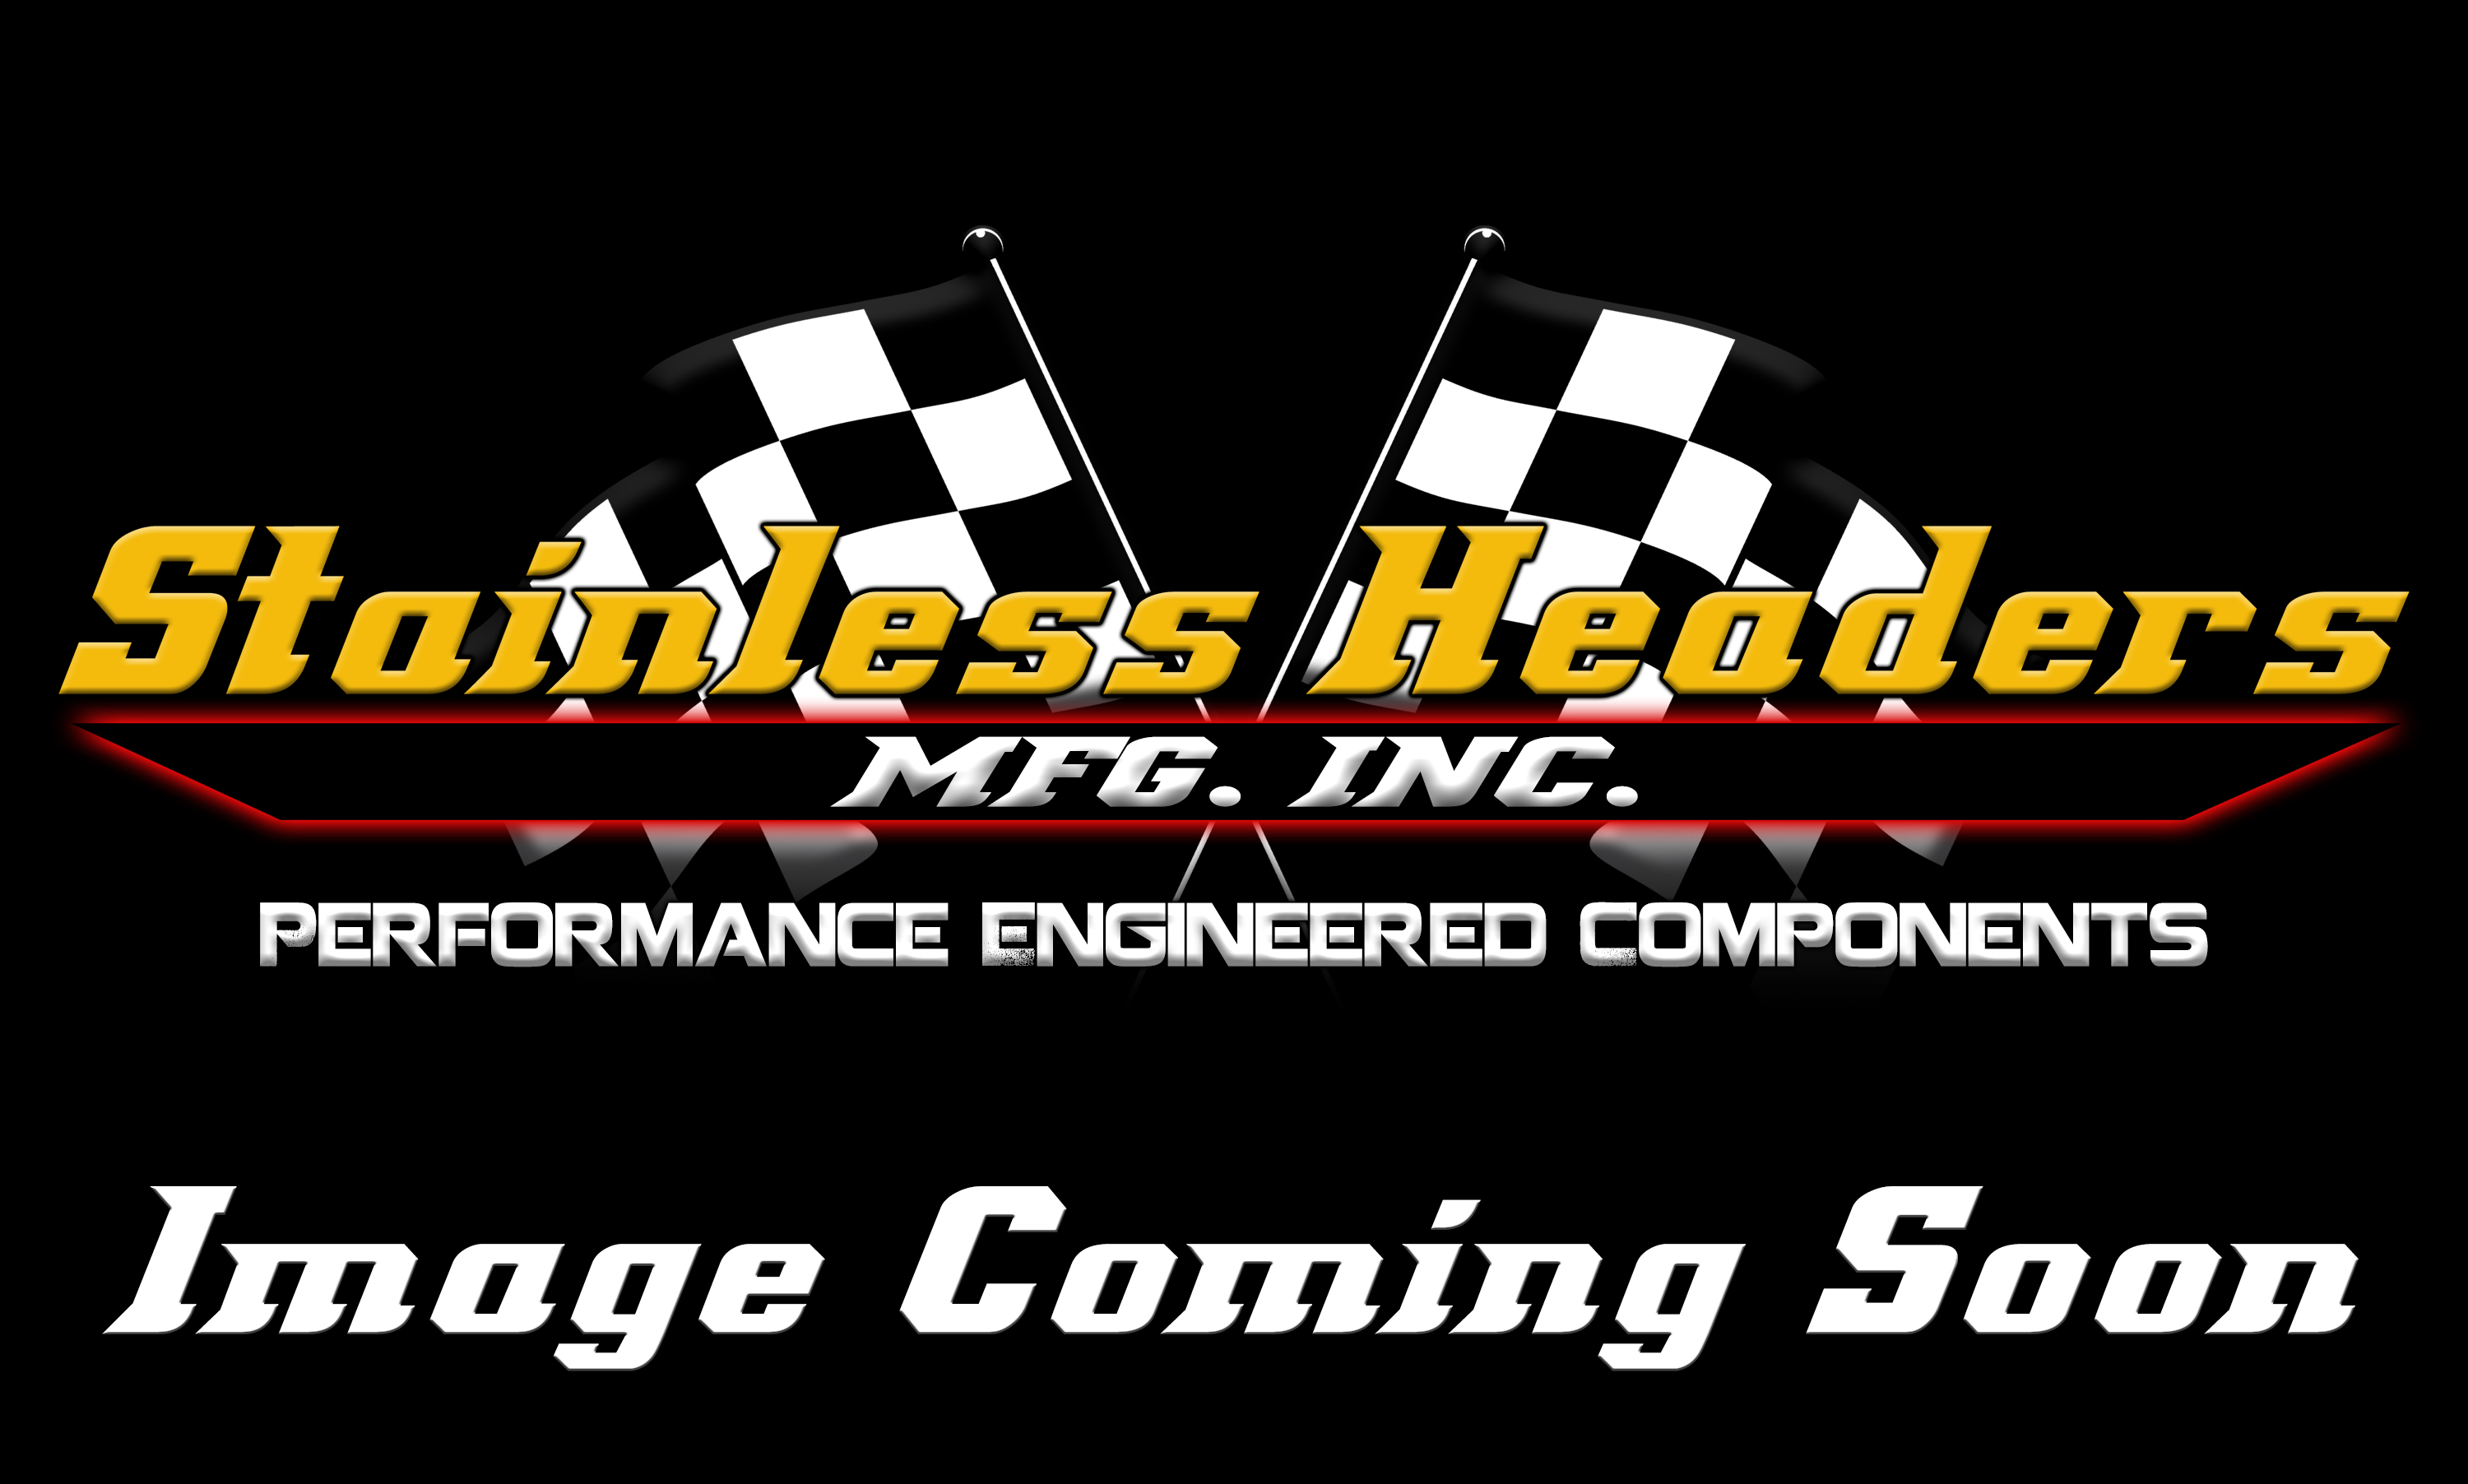 Stainless Headers - 1 7/8" Primary 5 into 1 Performance Merge Collector-16ga 304ss - Image 3